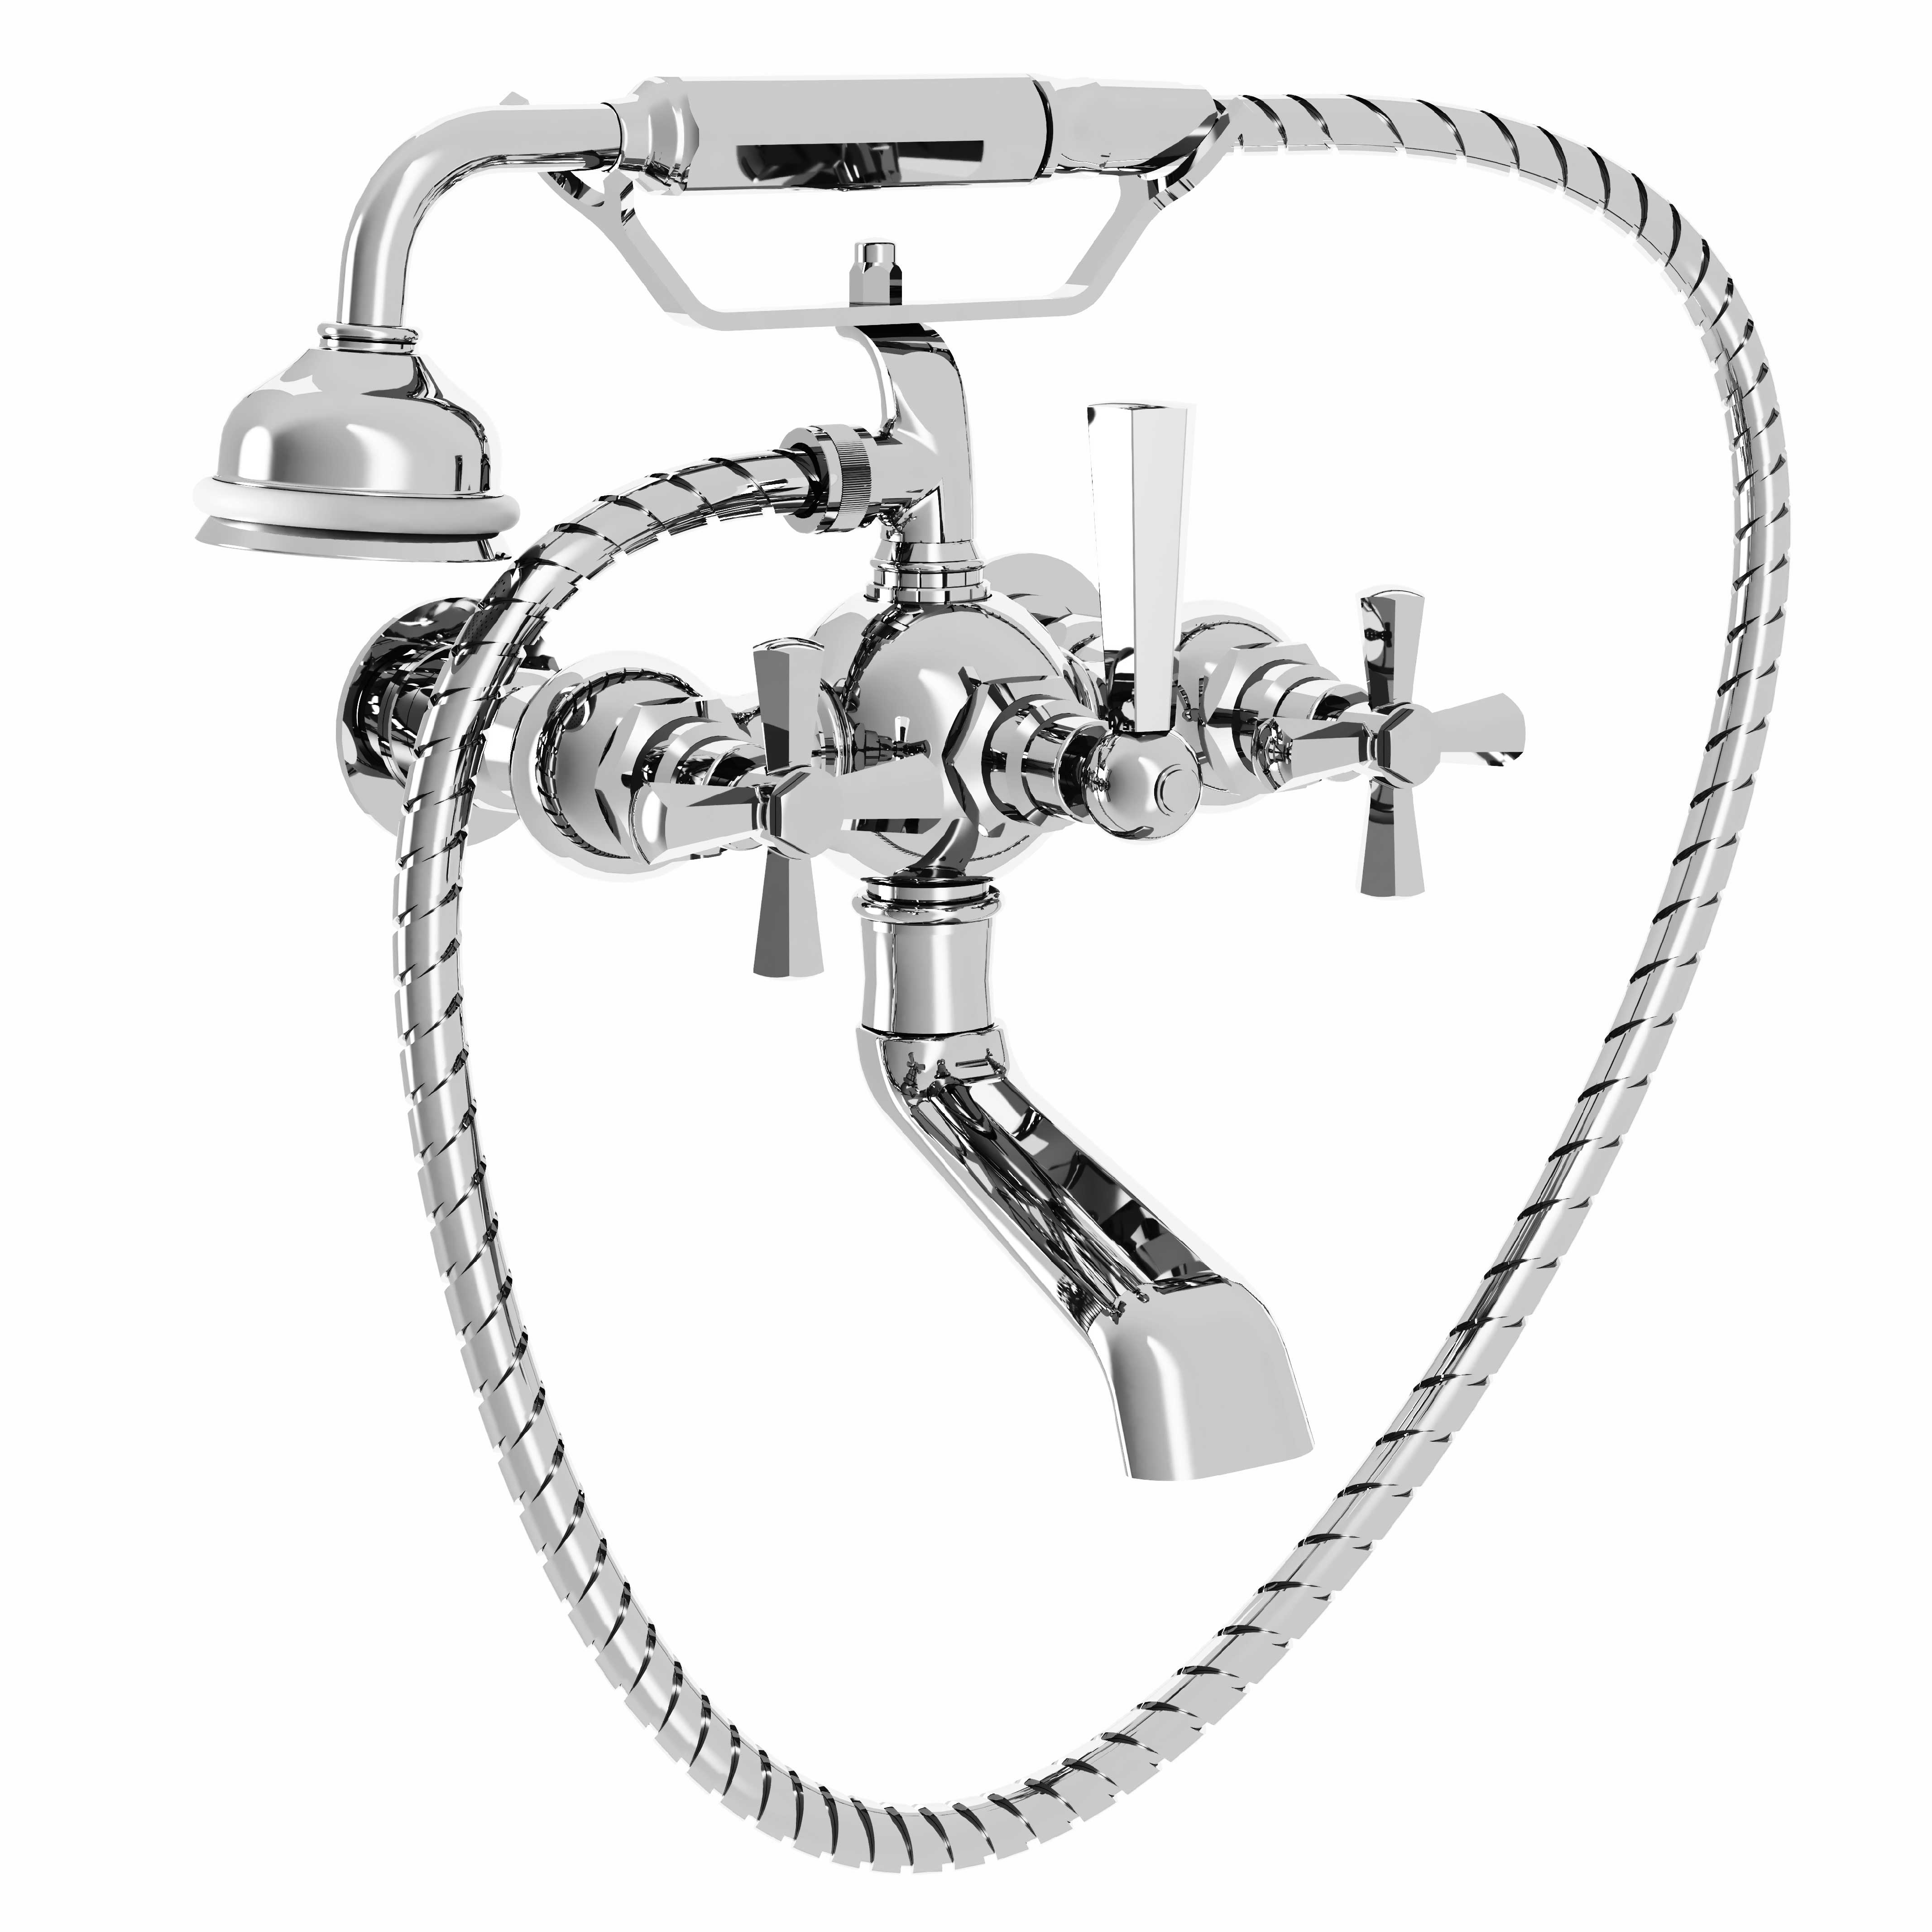 M38-3201 Wall mounted bath and shower mixer